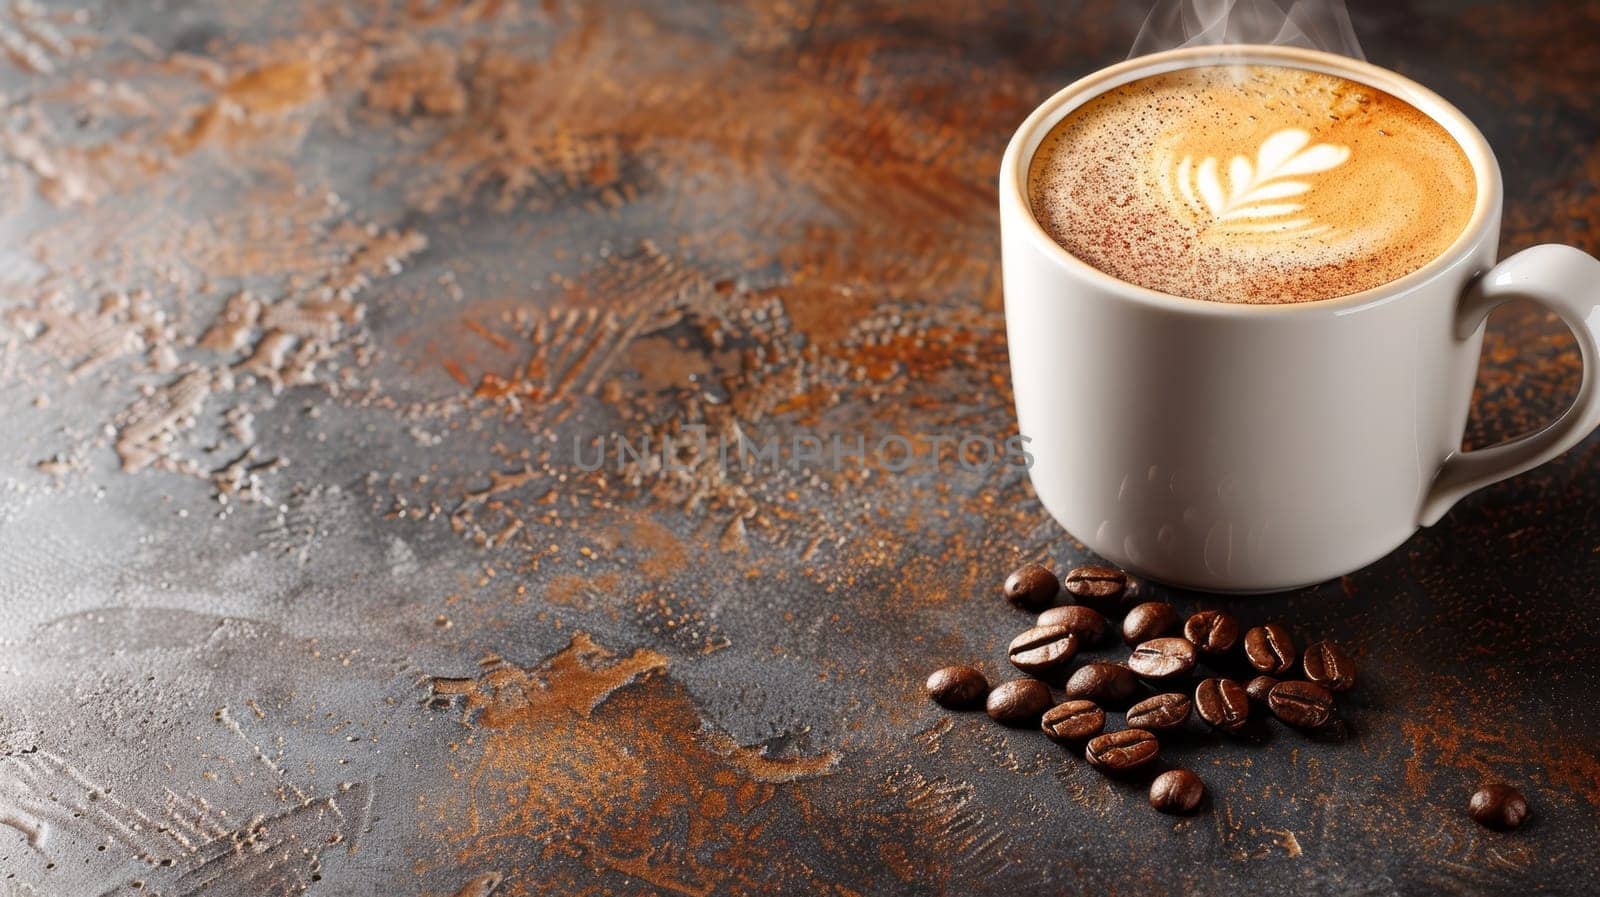 Steam rises from a white coffee cup, set against a textured background with scattered coffee beans, inviting a sensory experience. Banner with copy space